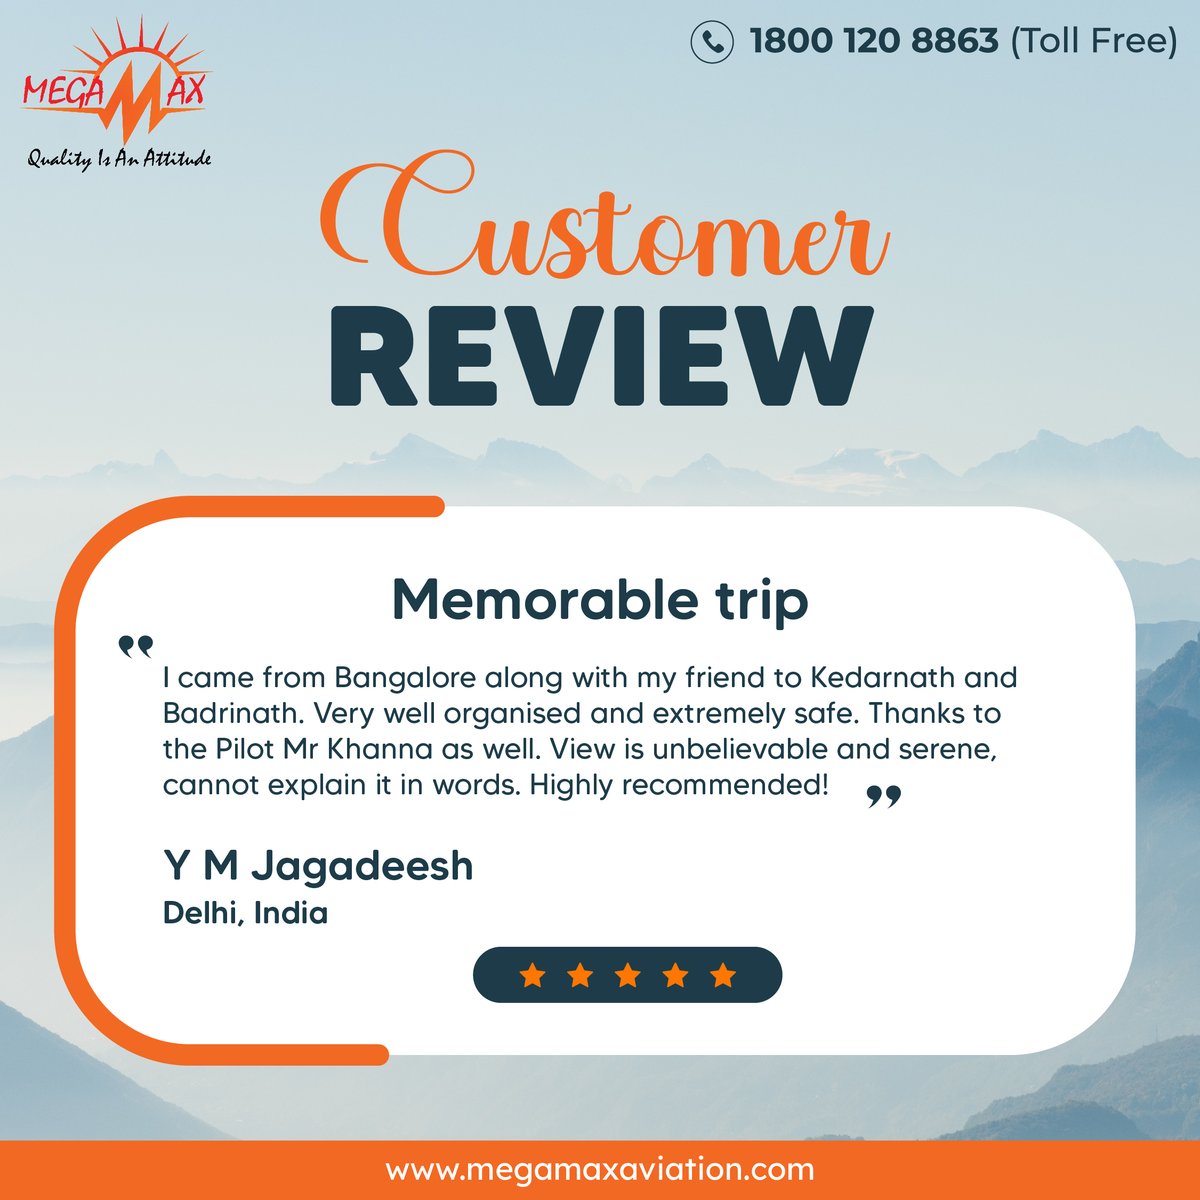 We strive for constant improvement every day, driven by the valuable feedback from our customers.

megamaxaviation.com

#megamaxaviation #aviationservices #customertestimonials #chardhamyatra